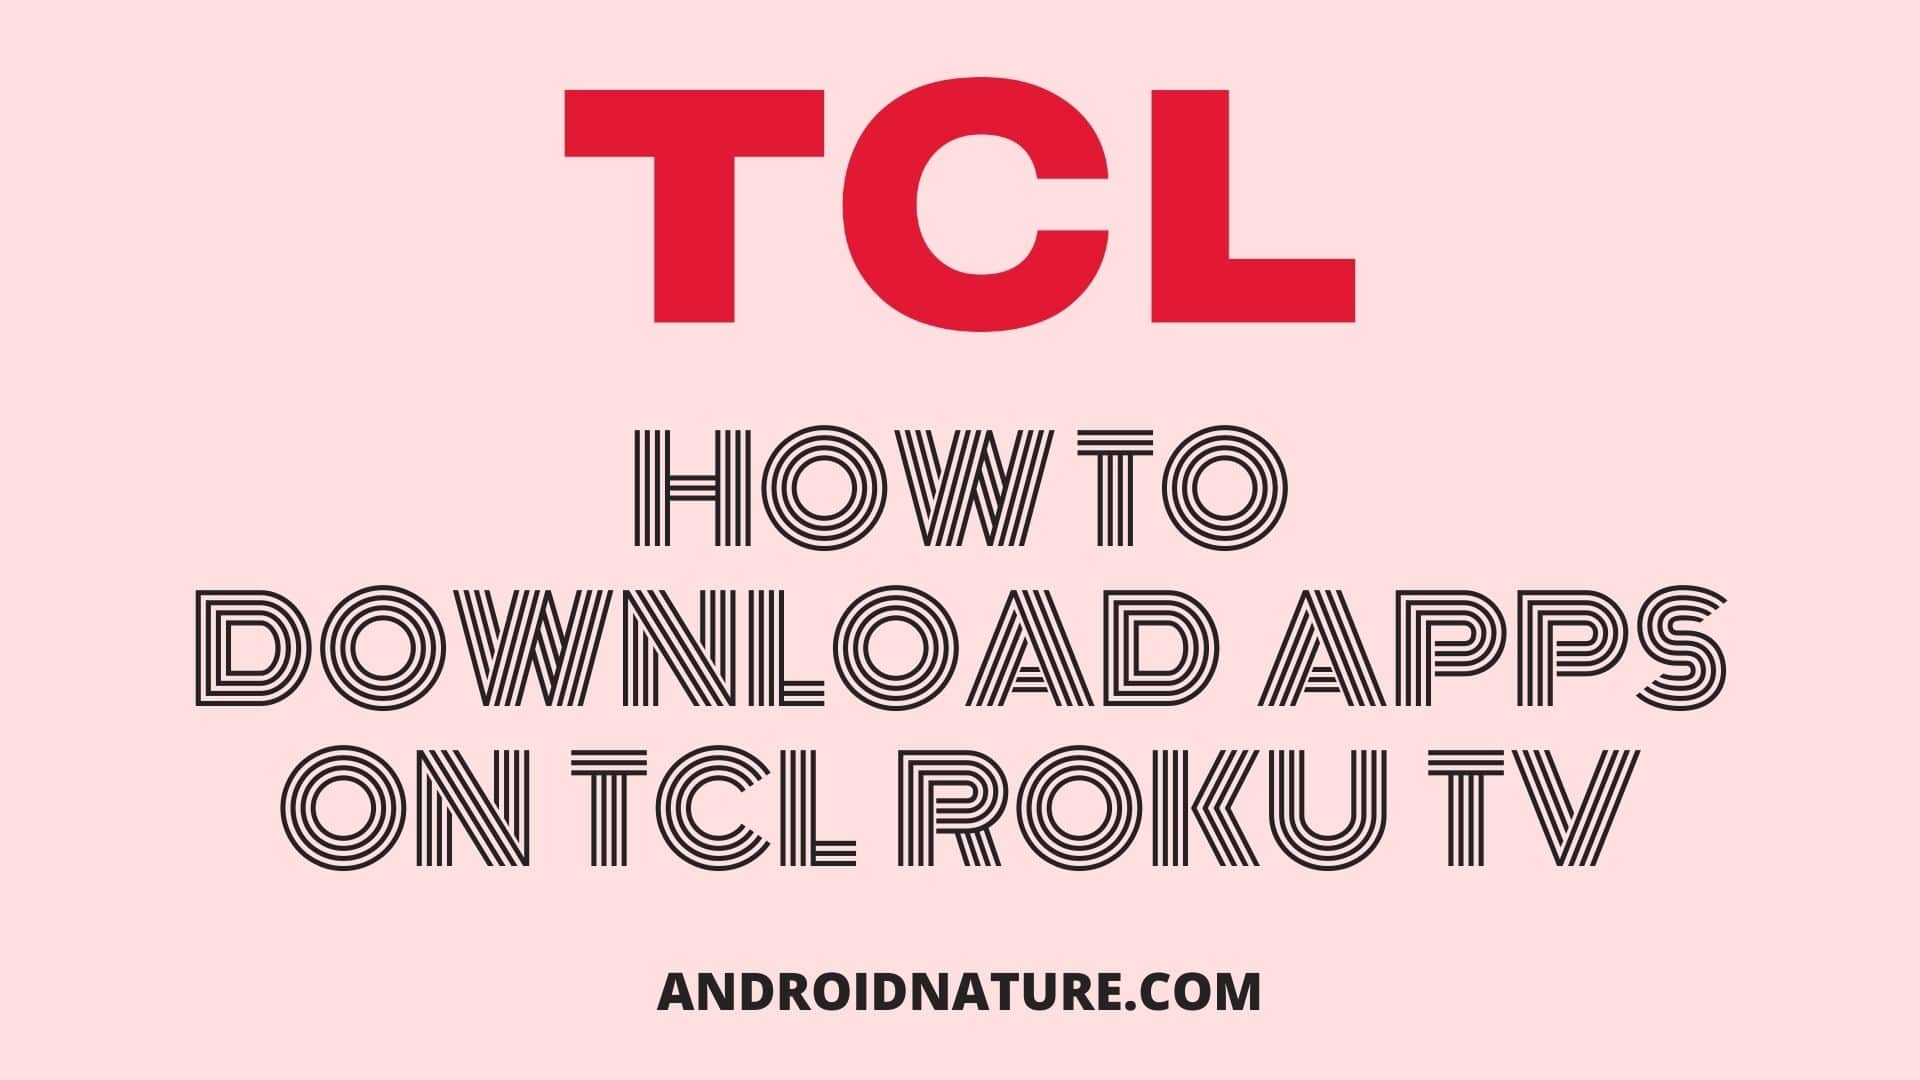 Download apps on TCL TV